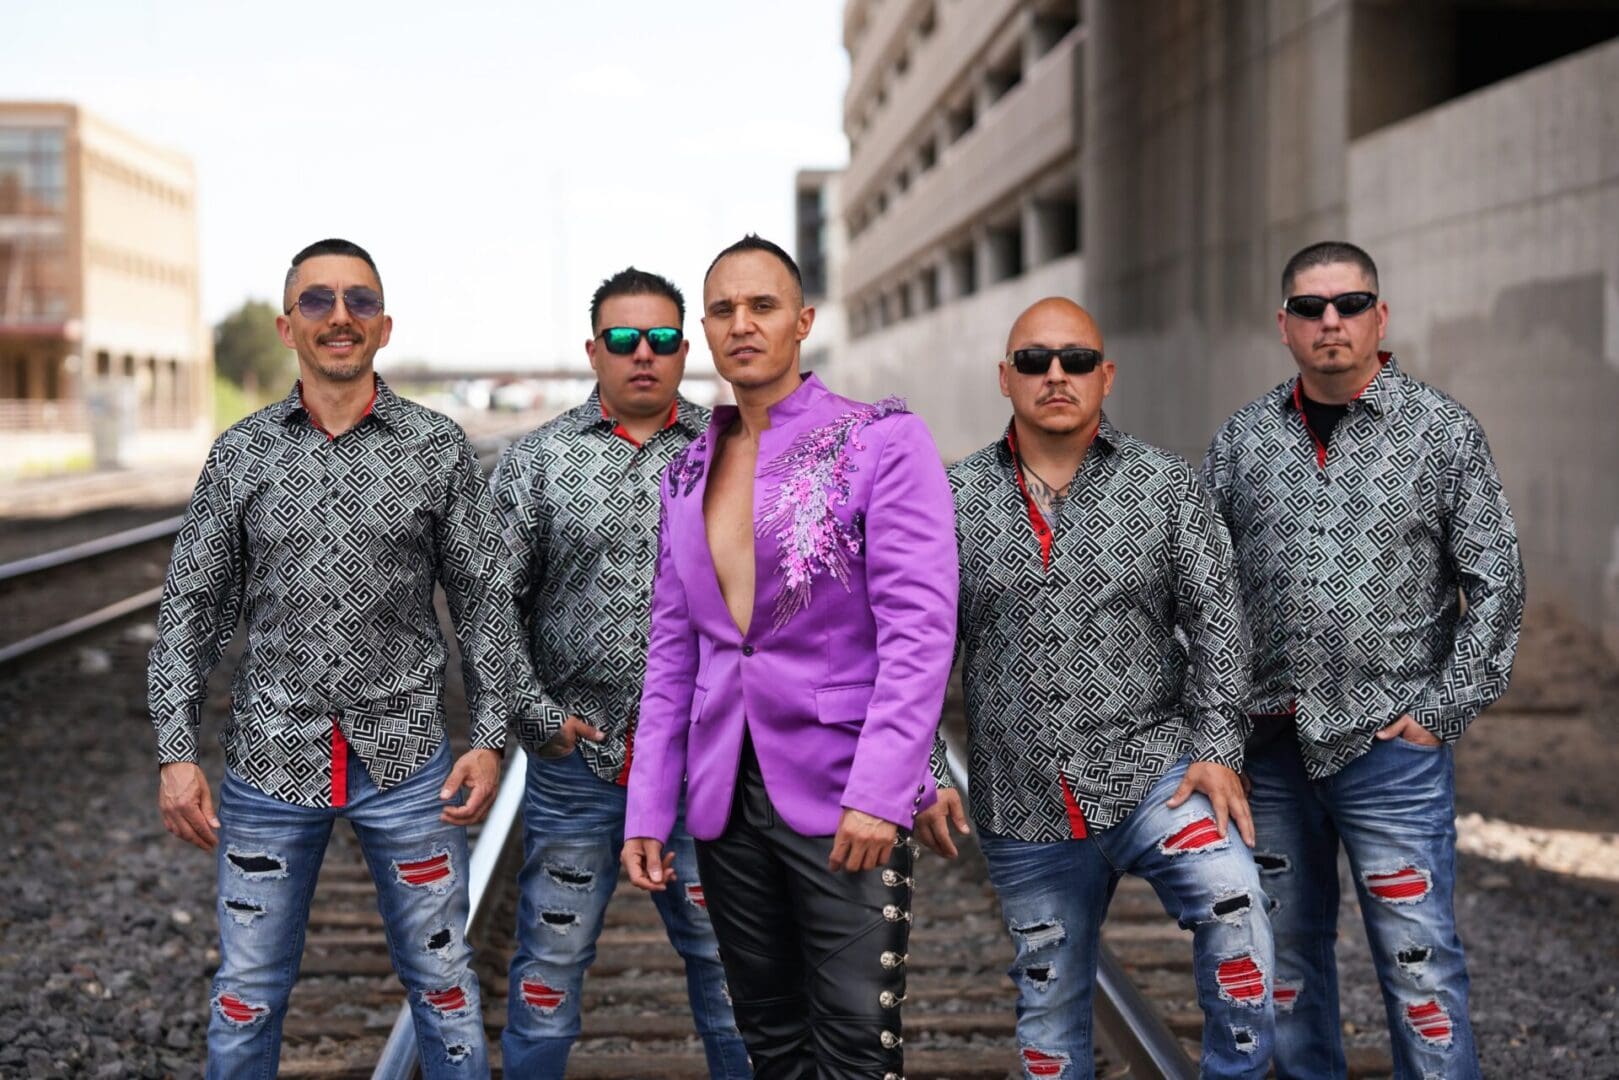 A group of men in purple jackets standing on railroad tracks.